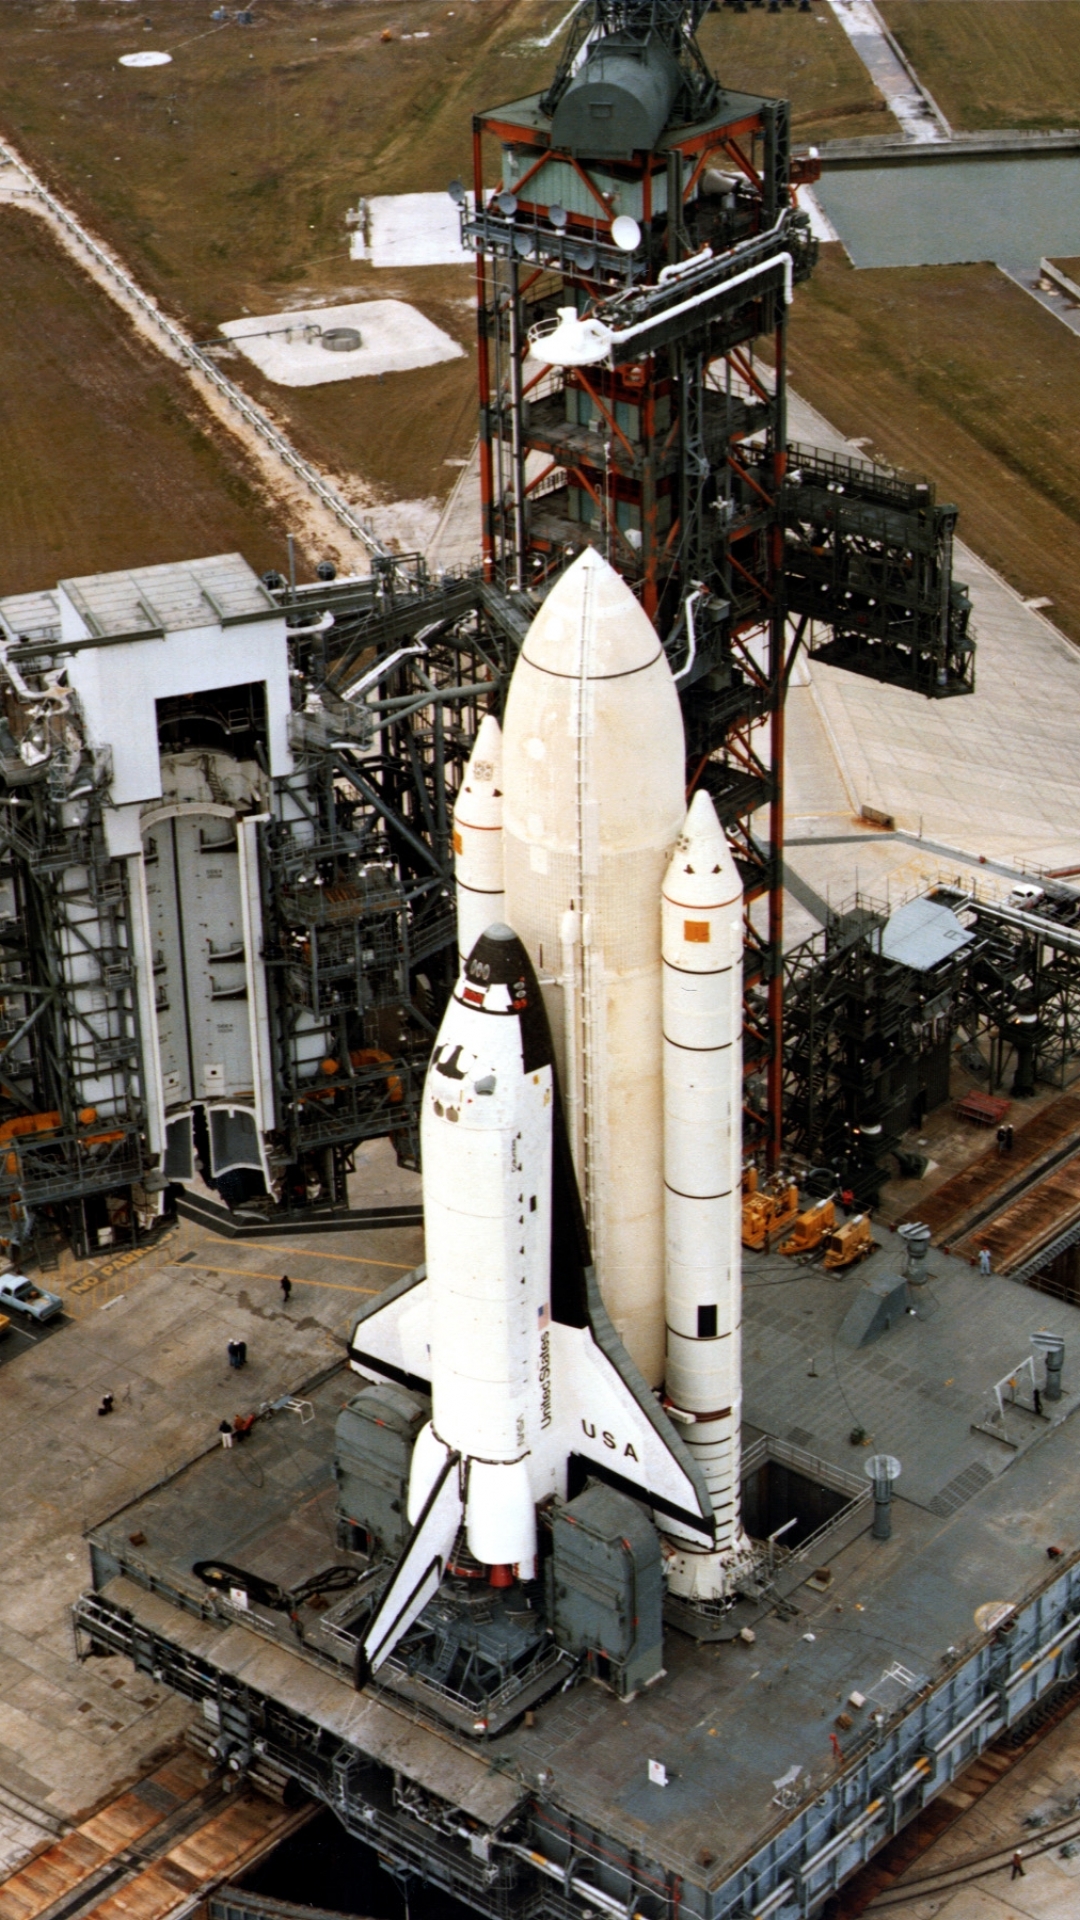 vehicles, space shuttle columbia, space shuttles